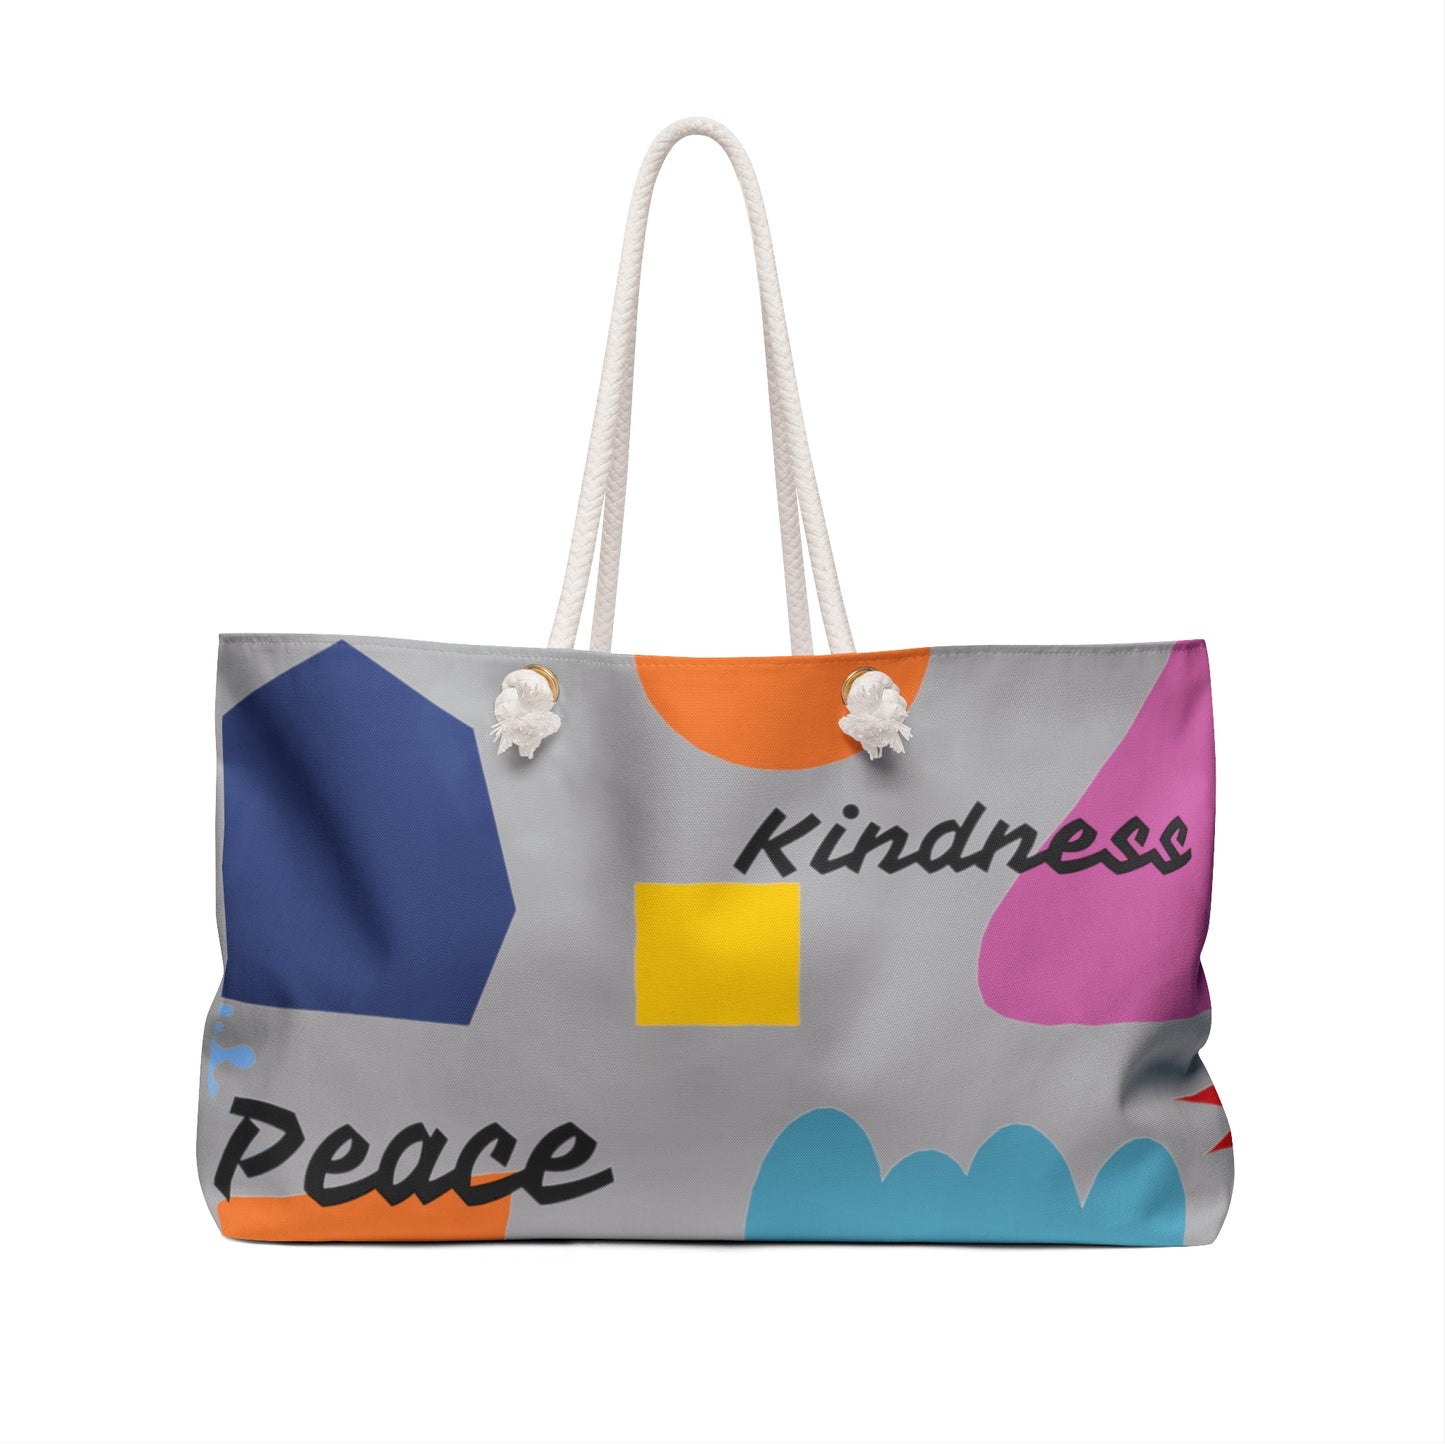 Travel in Style and Purpose: Vibrant Weekender Bag with Inspirational Message